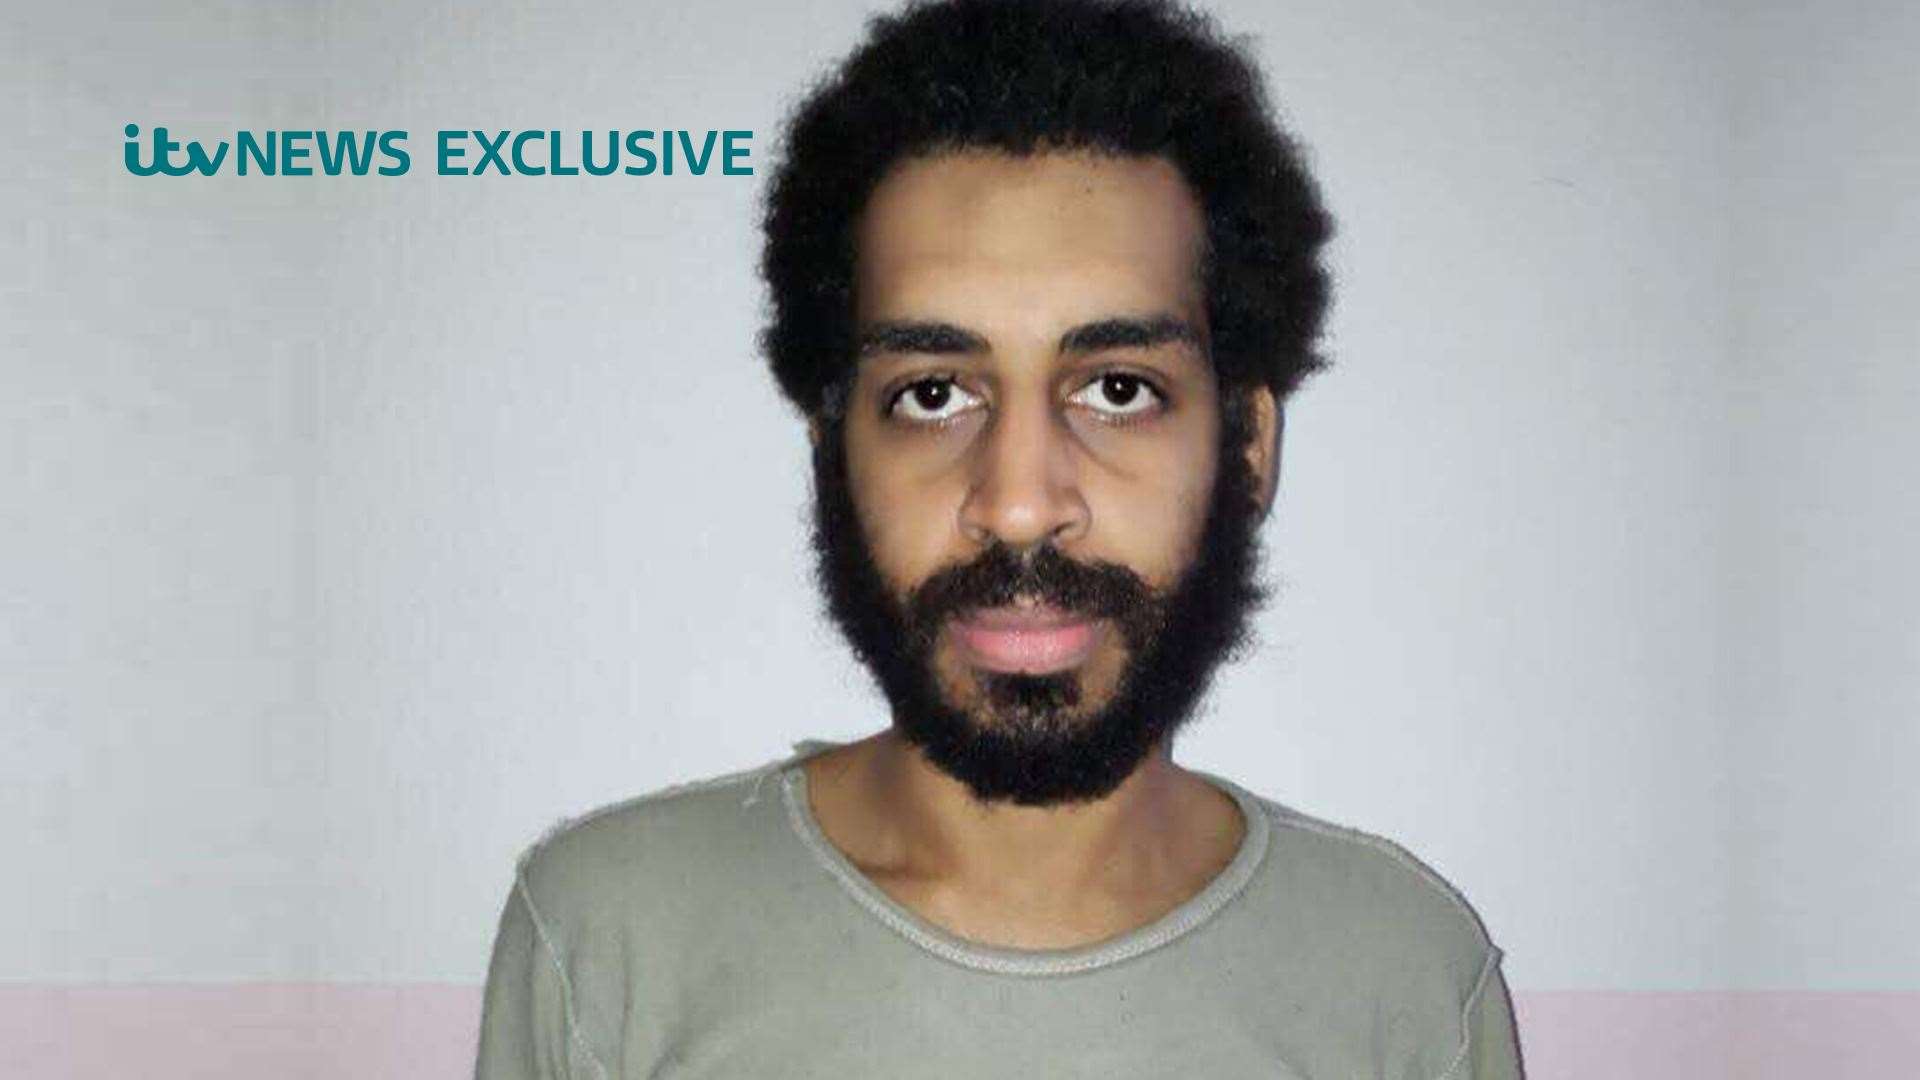 Alexanda Kotey is due to be sentenced over his involvement with The Beatles terror cell (ITV News/PA)